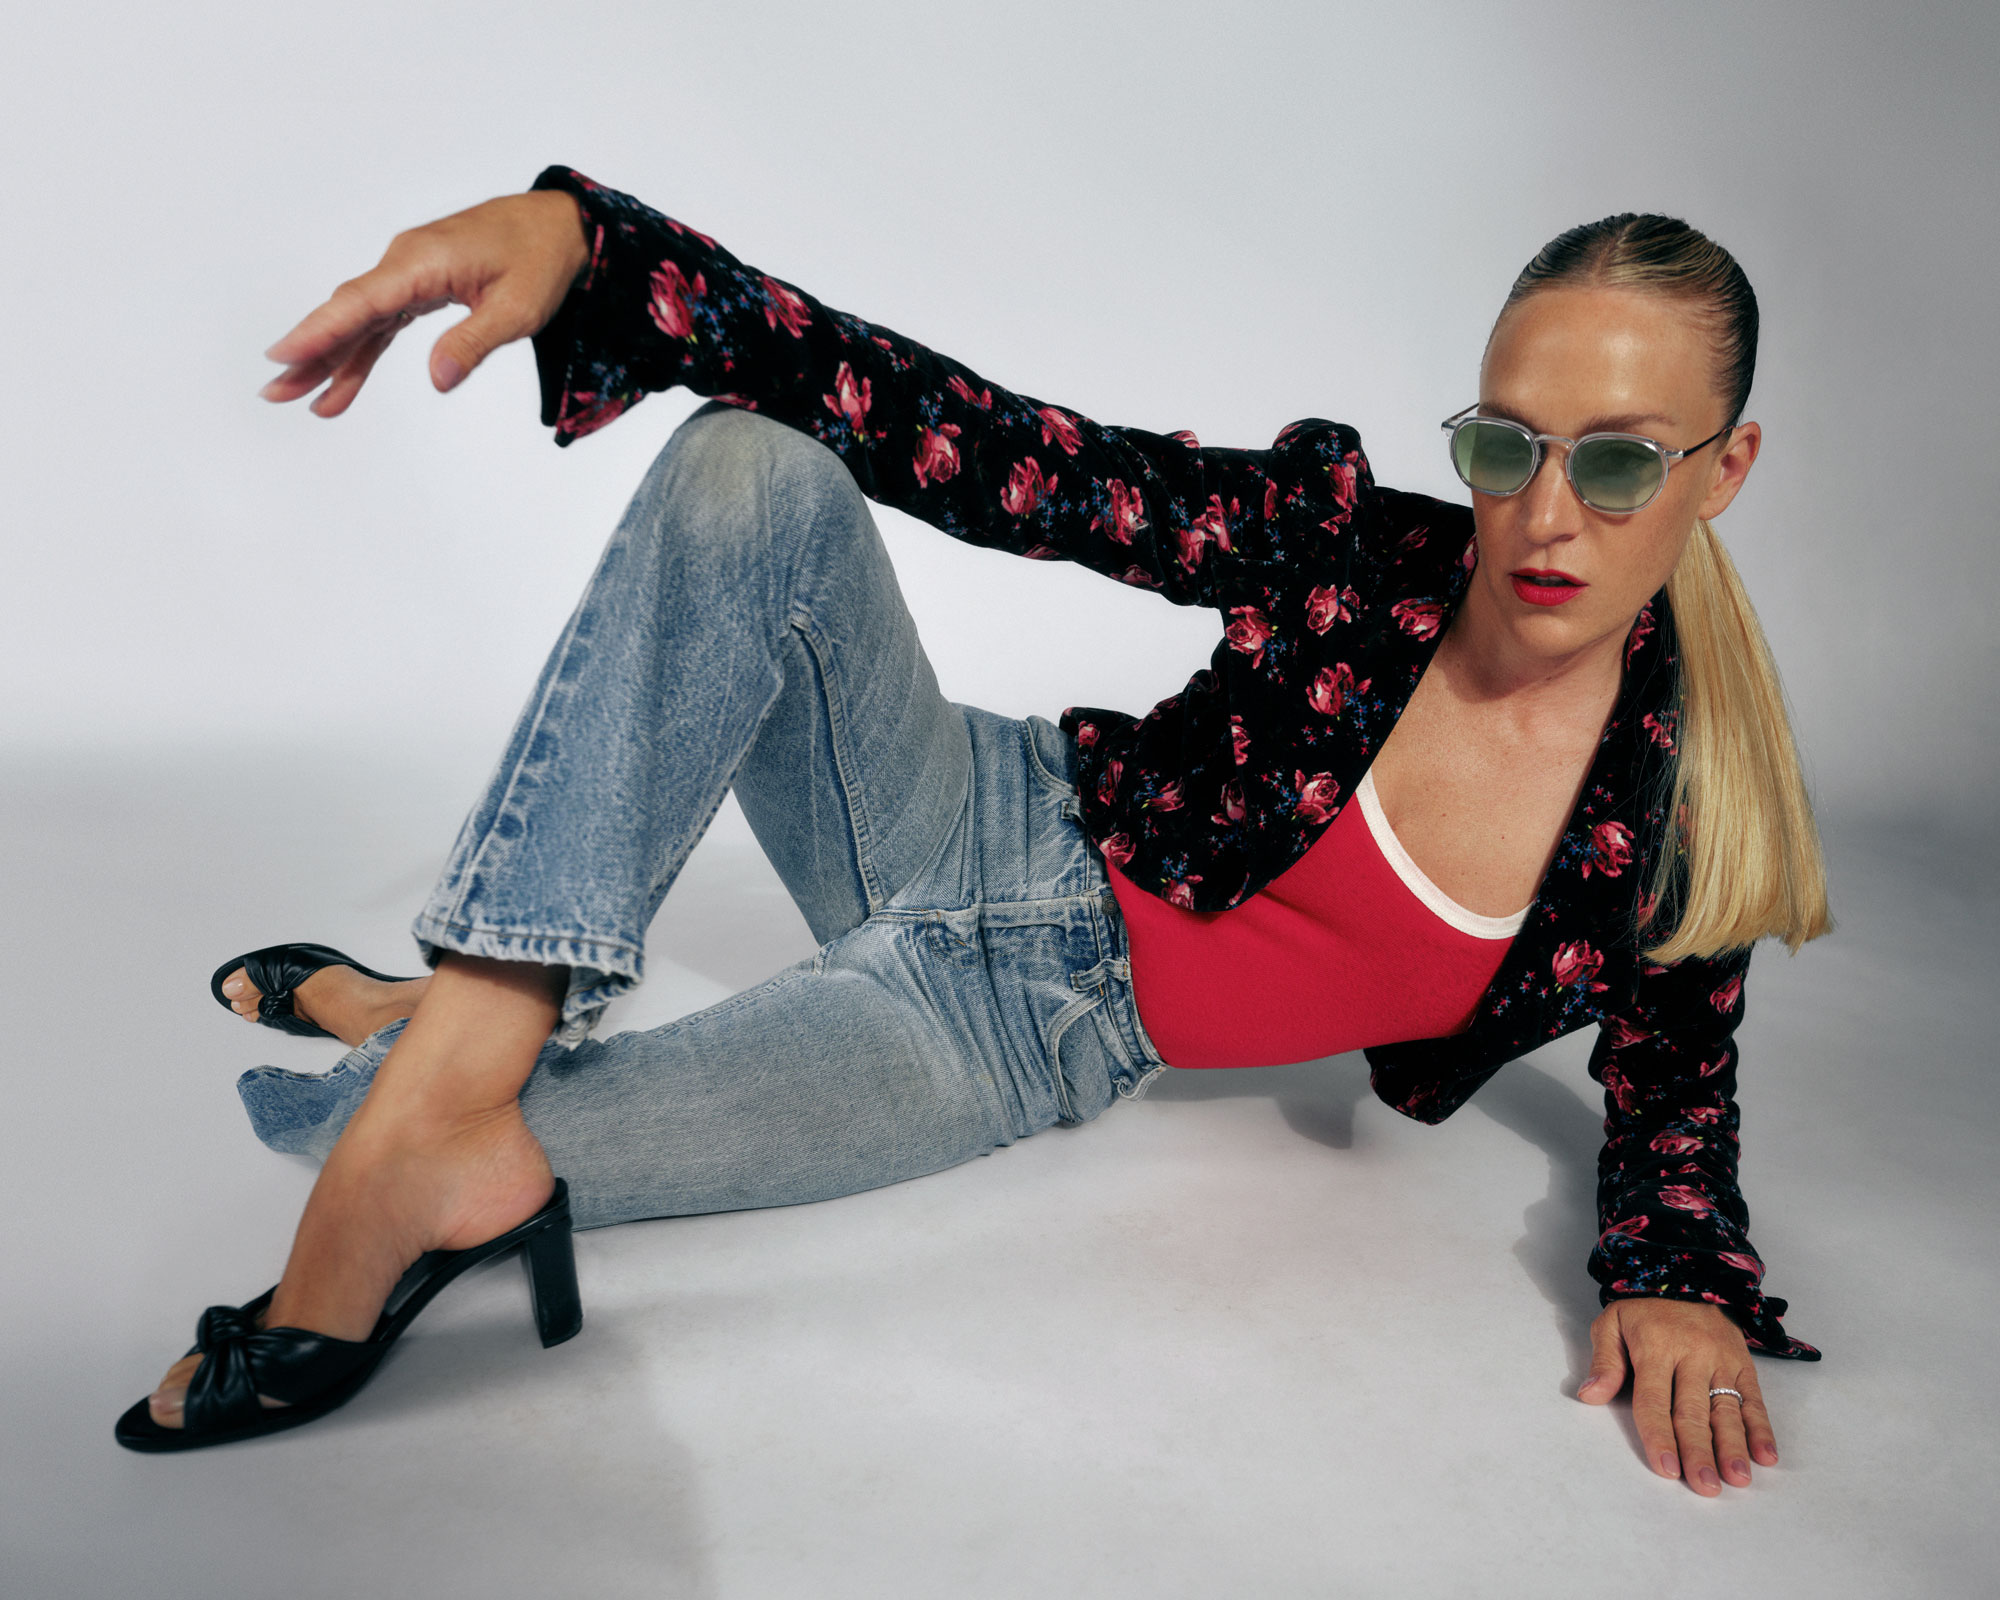 chloe Sevigny models her warby parker eyewear collection